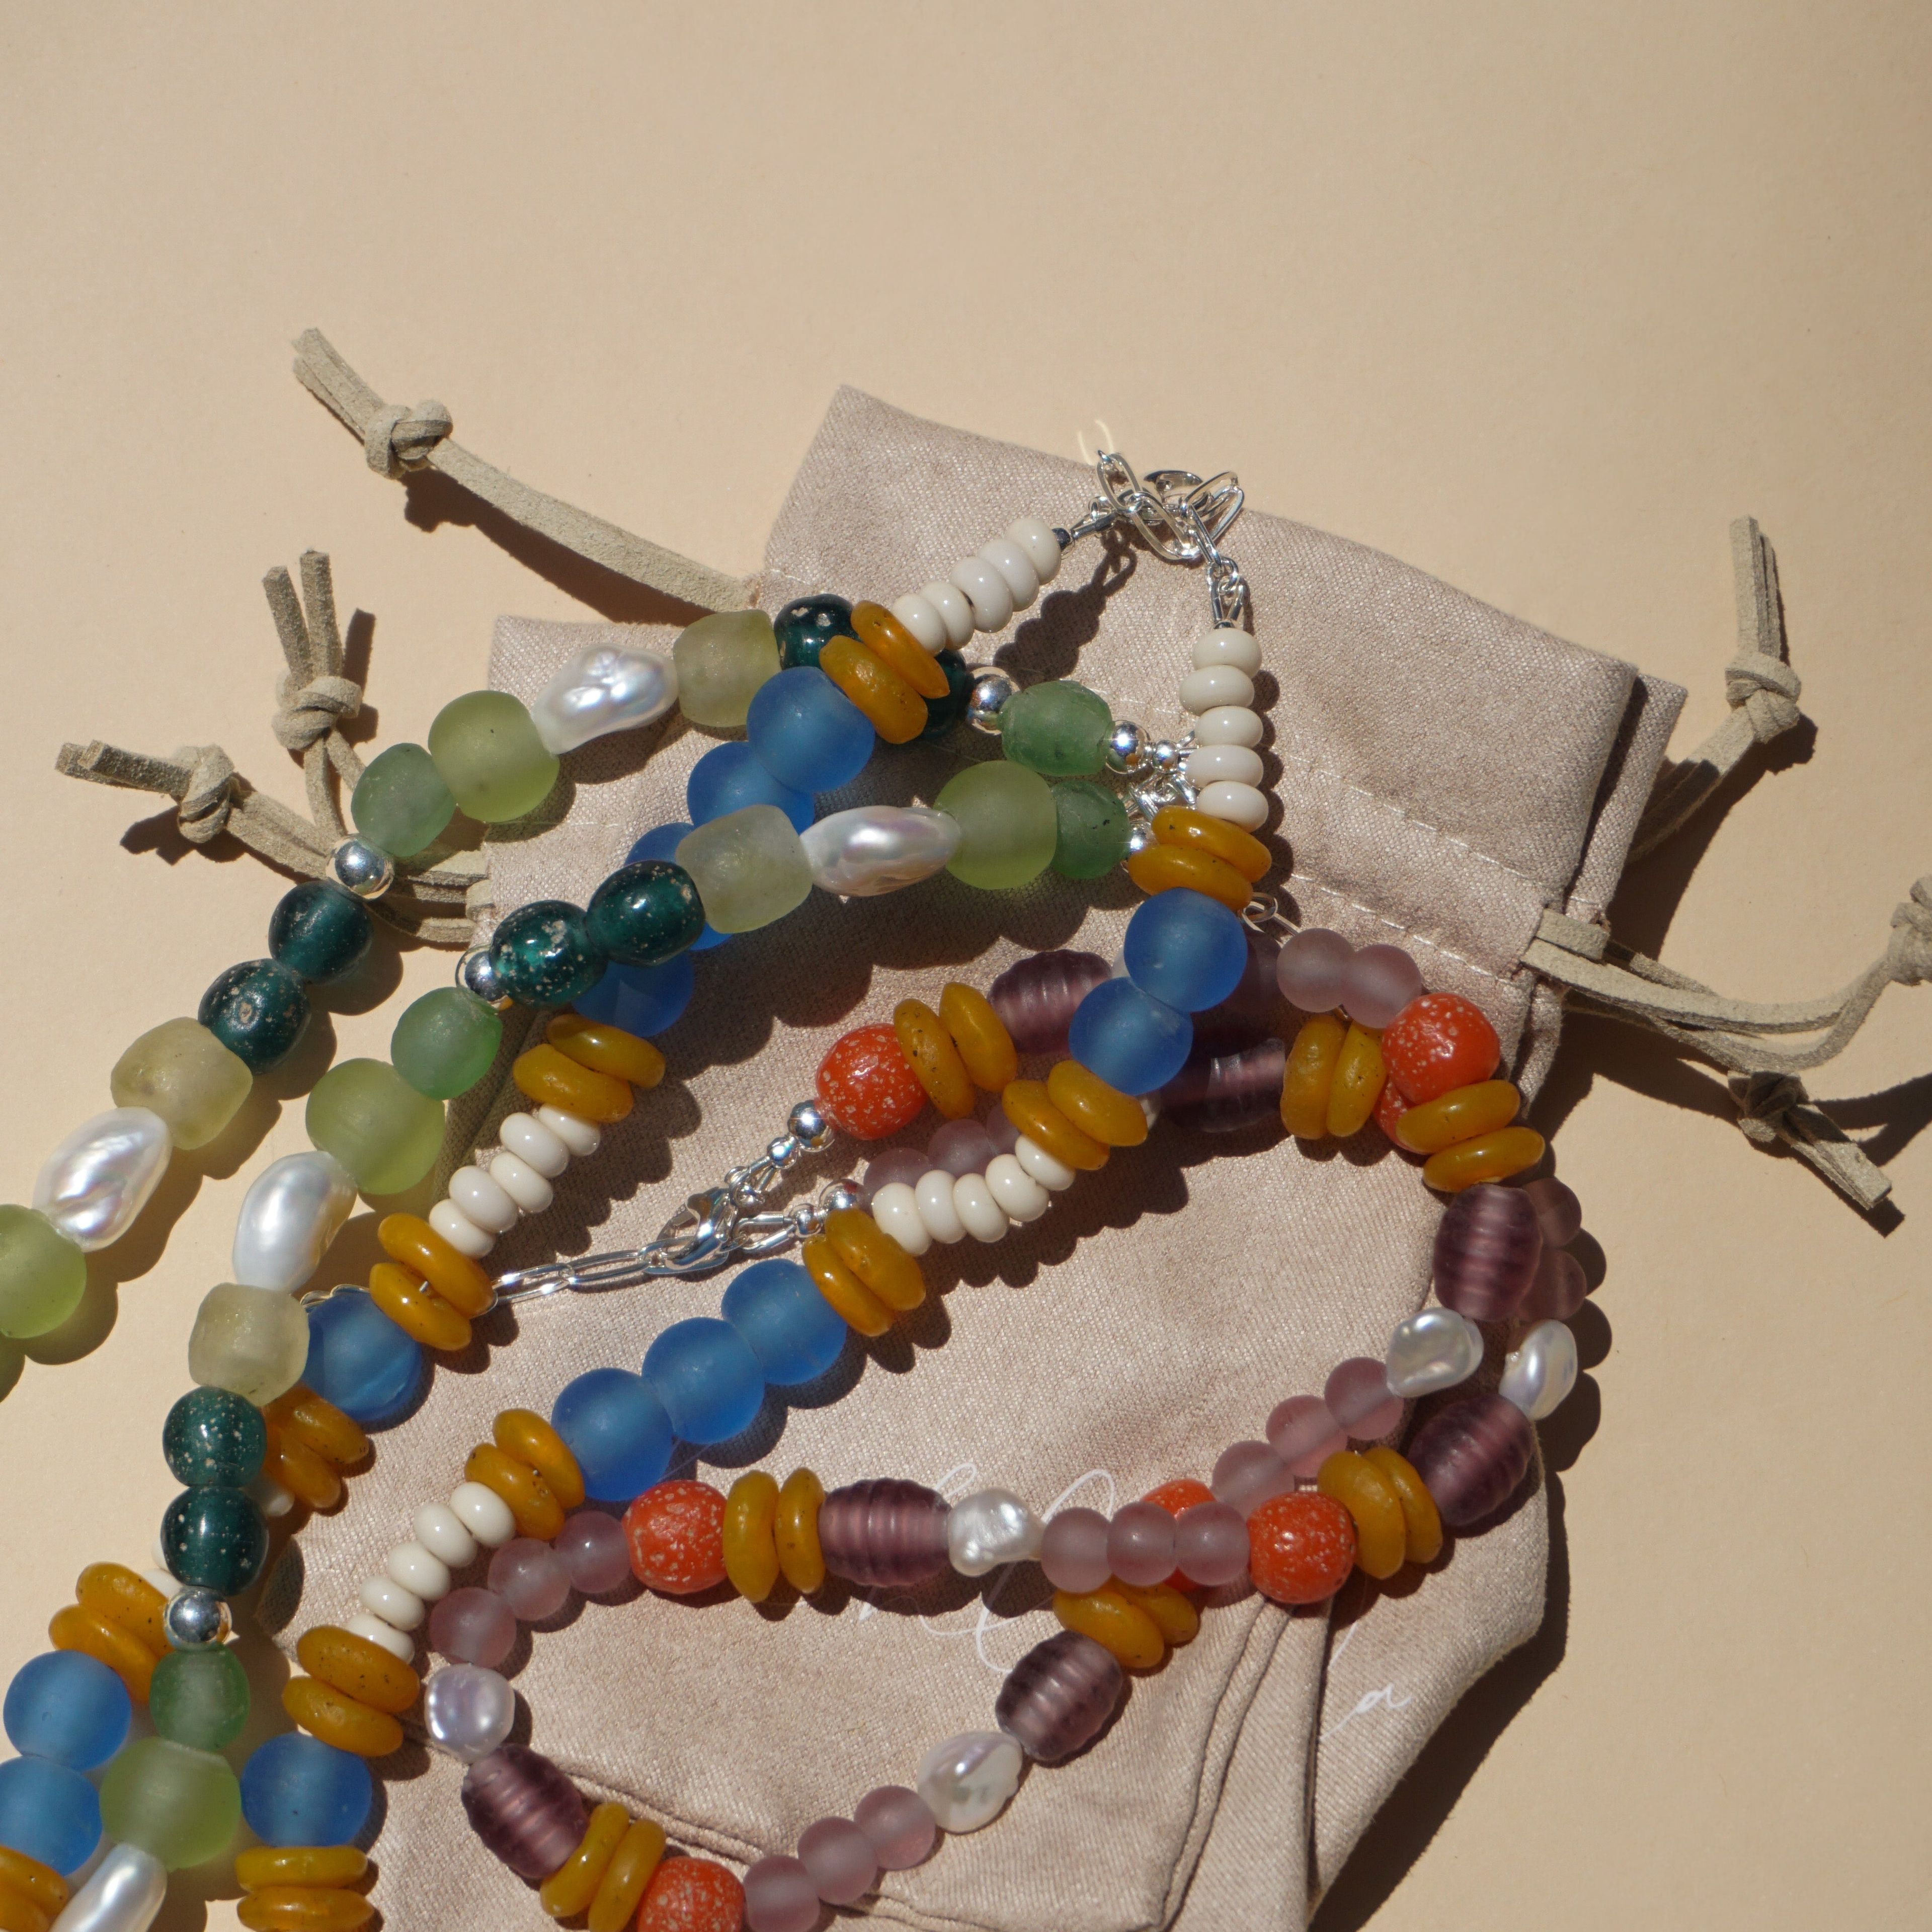 Blue Recycled Glass Beaded Necklace - Azul No 2